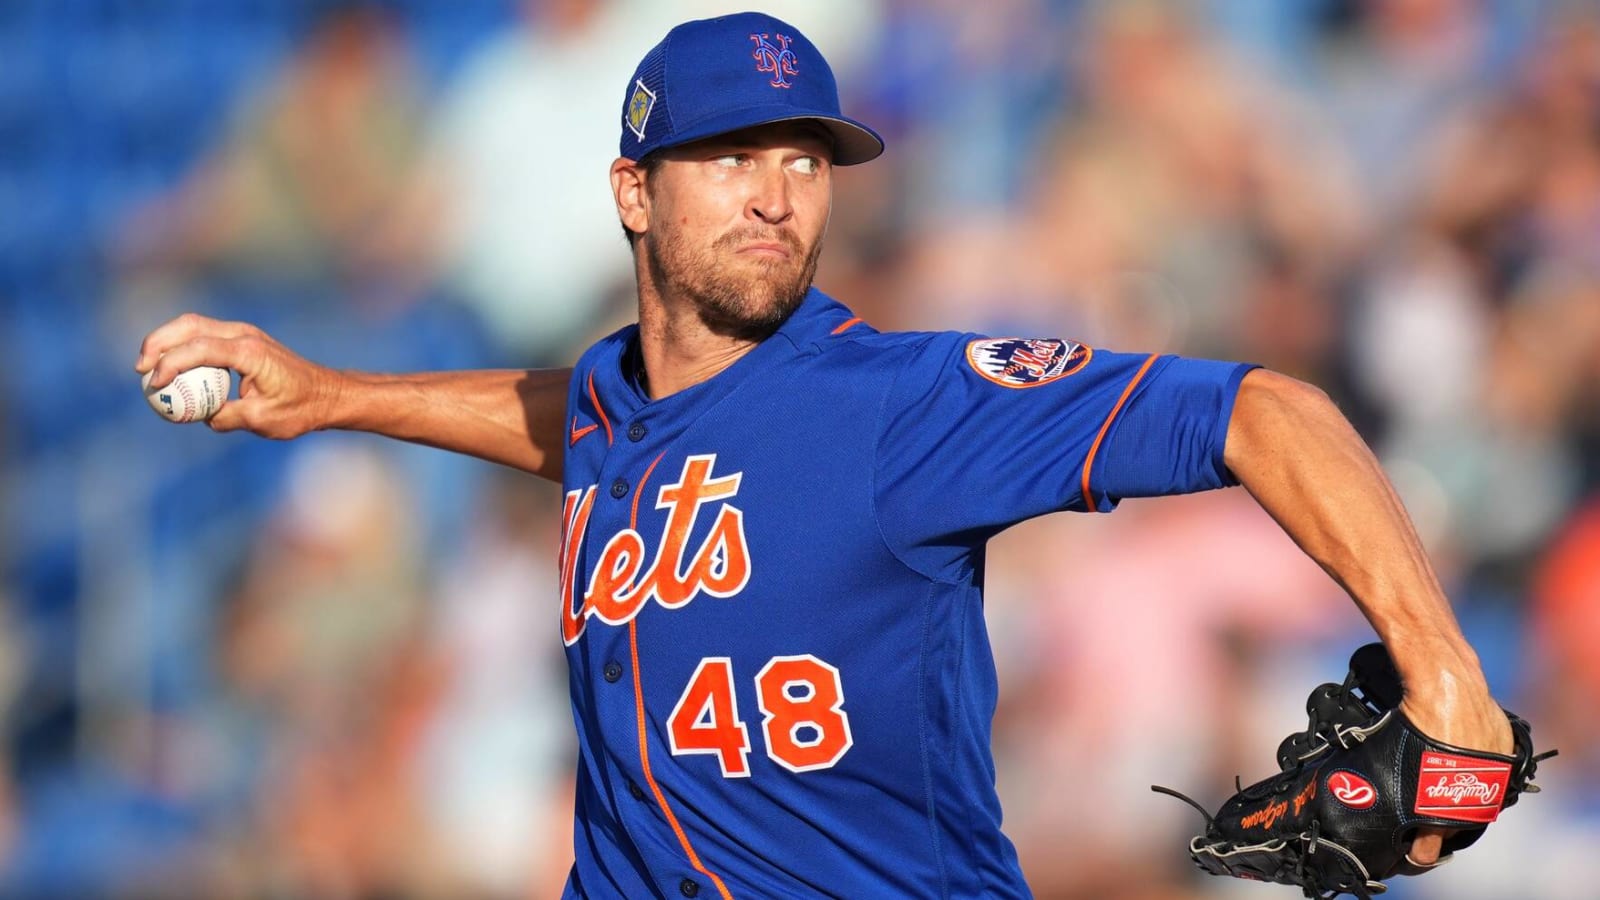 Jacob deGrom to alter throwing mechanics to prevent reinjury